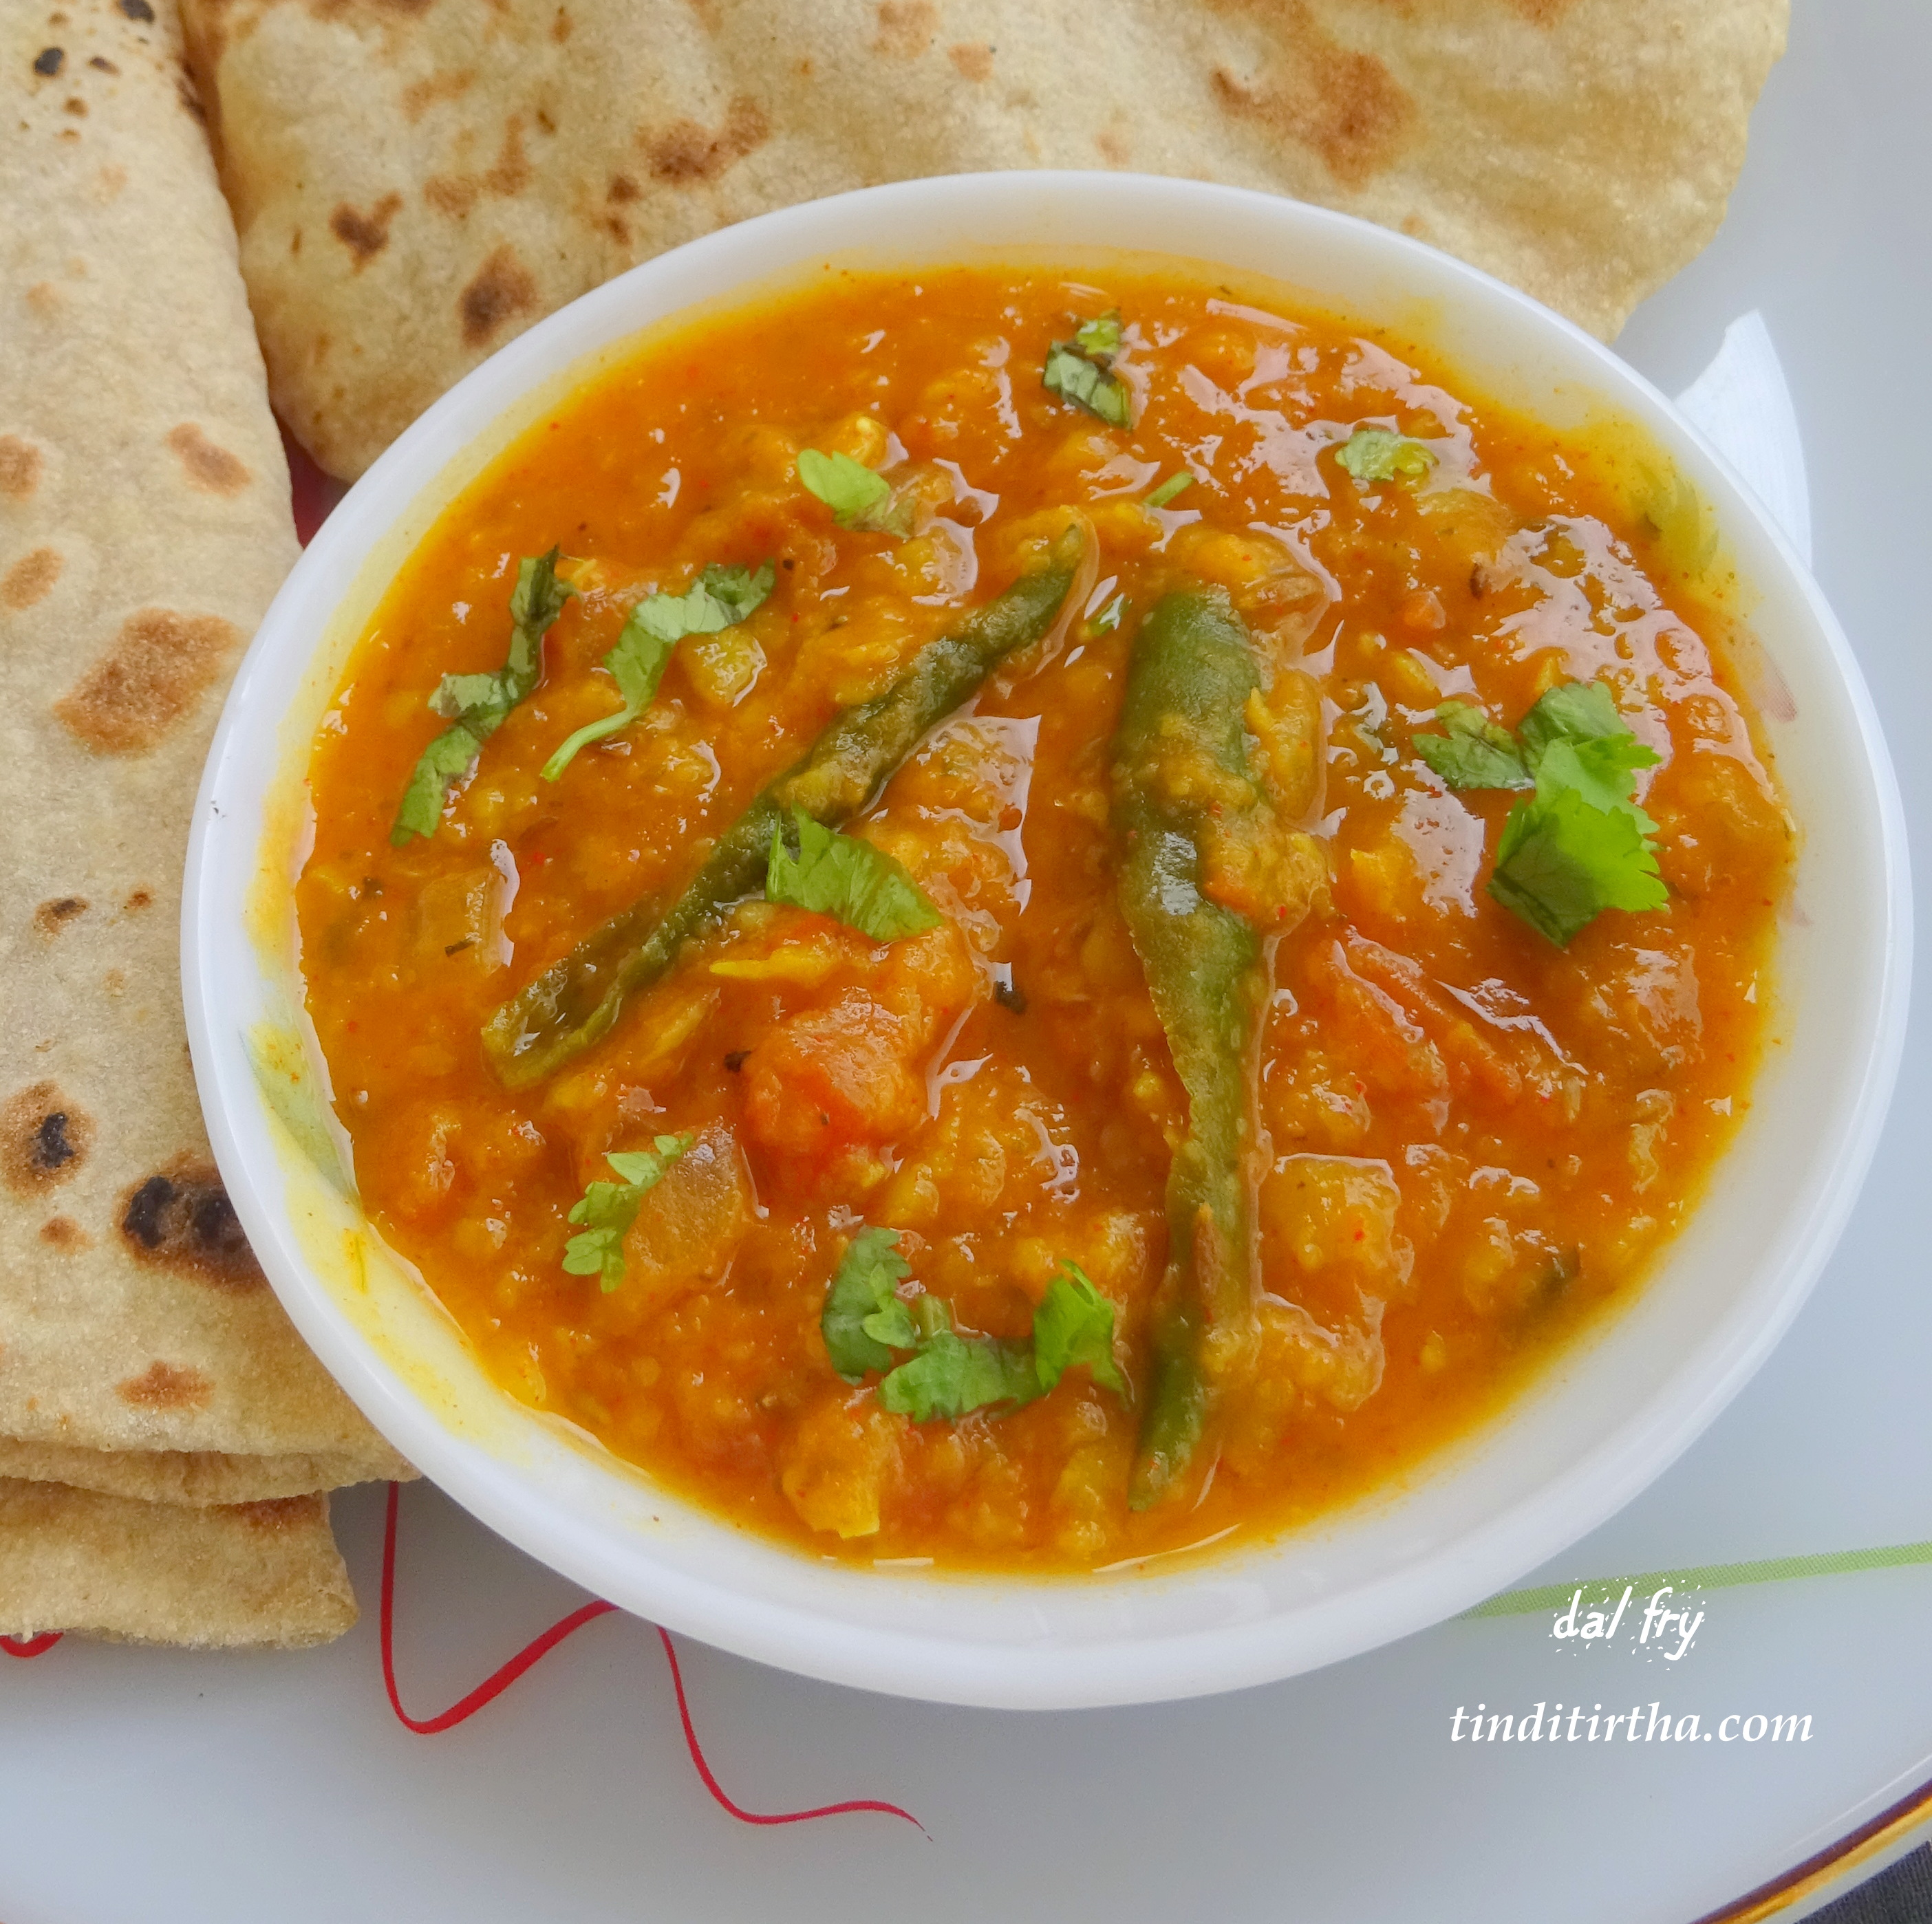 DAL FRY with a small twist to go with ROTI/PHULKA or RICE